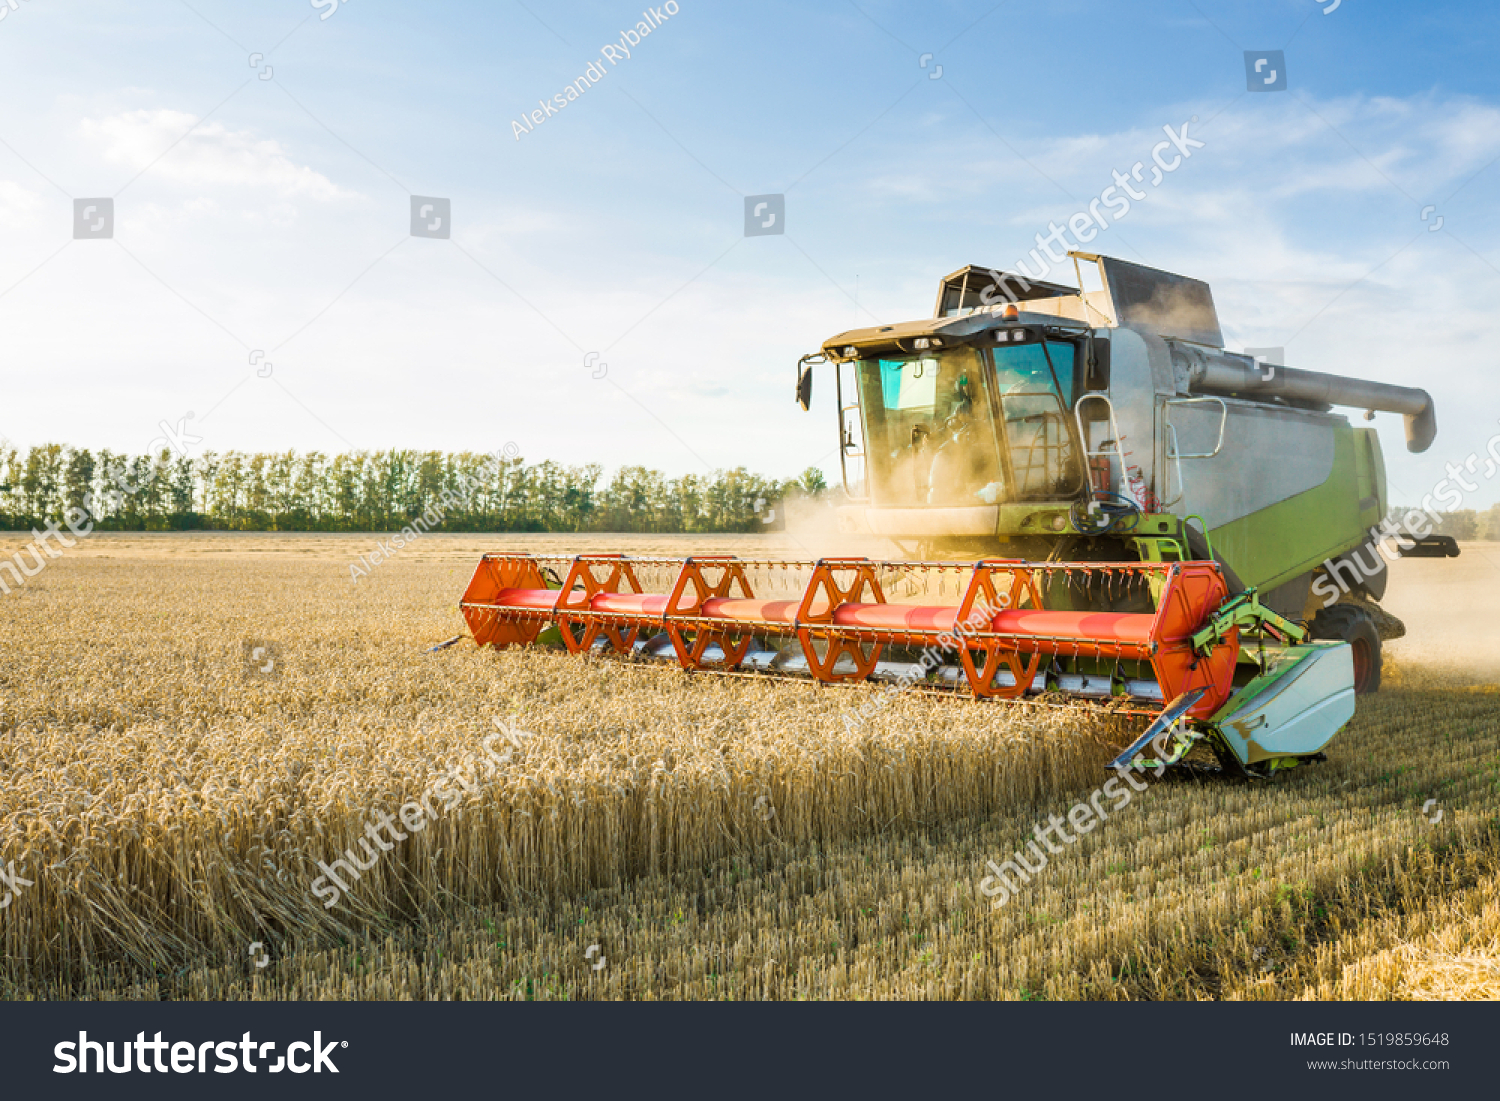 Combine harvester harvesting ripe golden wheat on the field. The image of the agricultural industry #1519859648